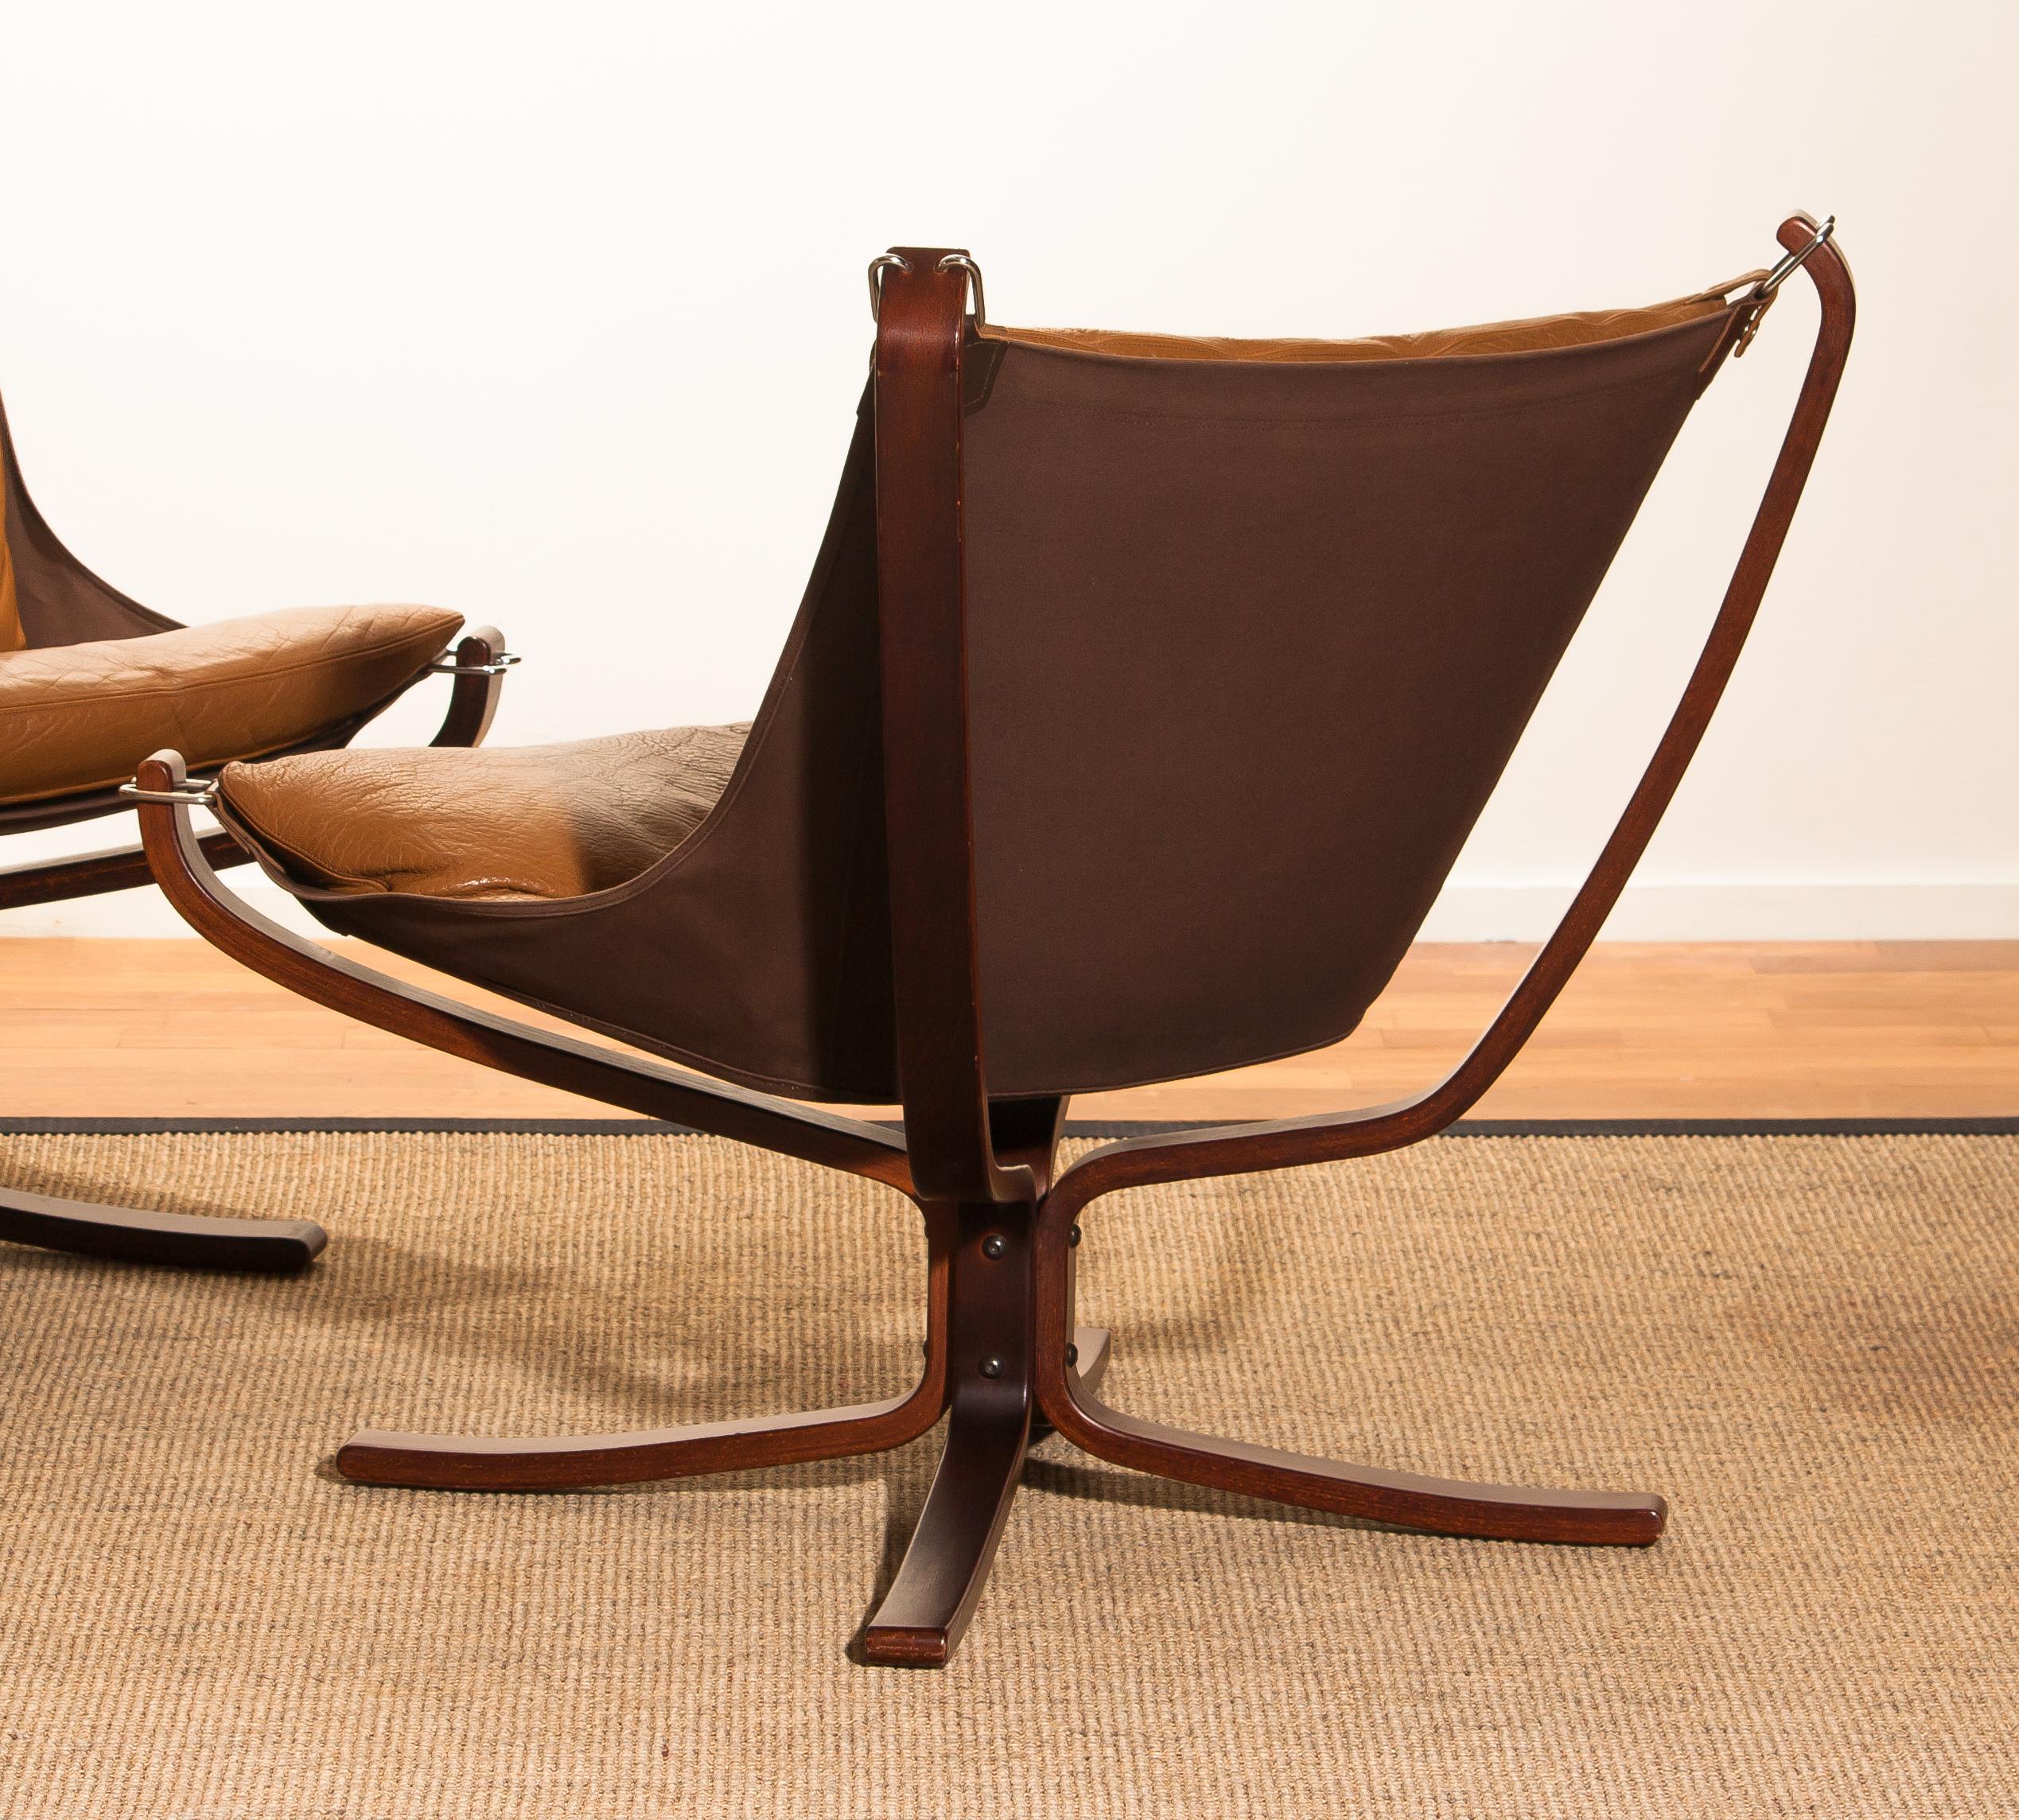 Three Camel Leather 'Falcon' Lounge Chairs or Easy Chairs by Sigurd Ressell In Good Condition In Silvolde, Gelderland